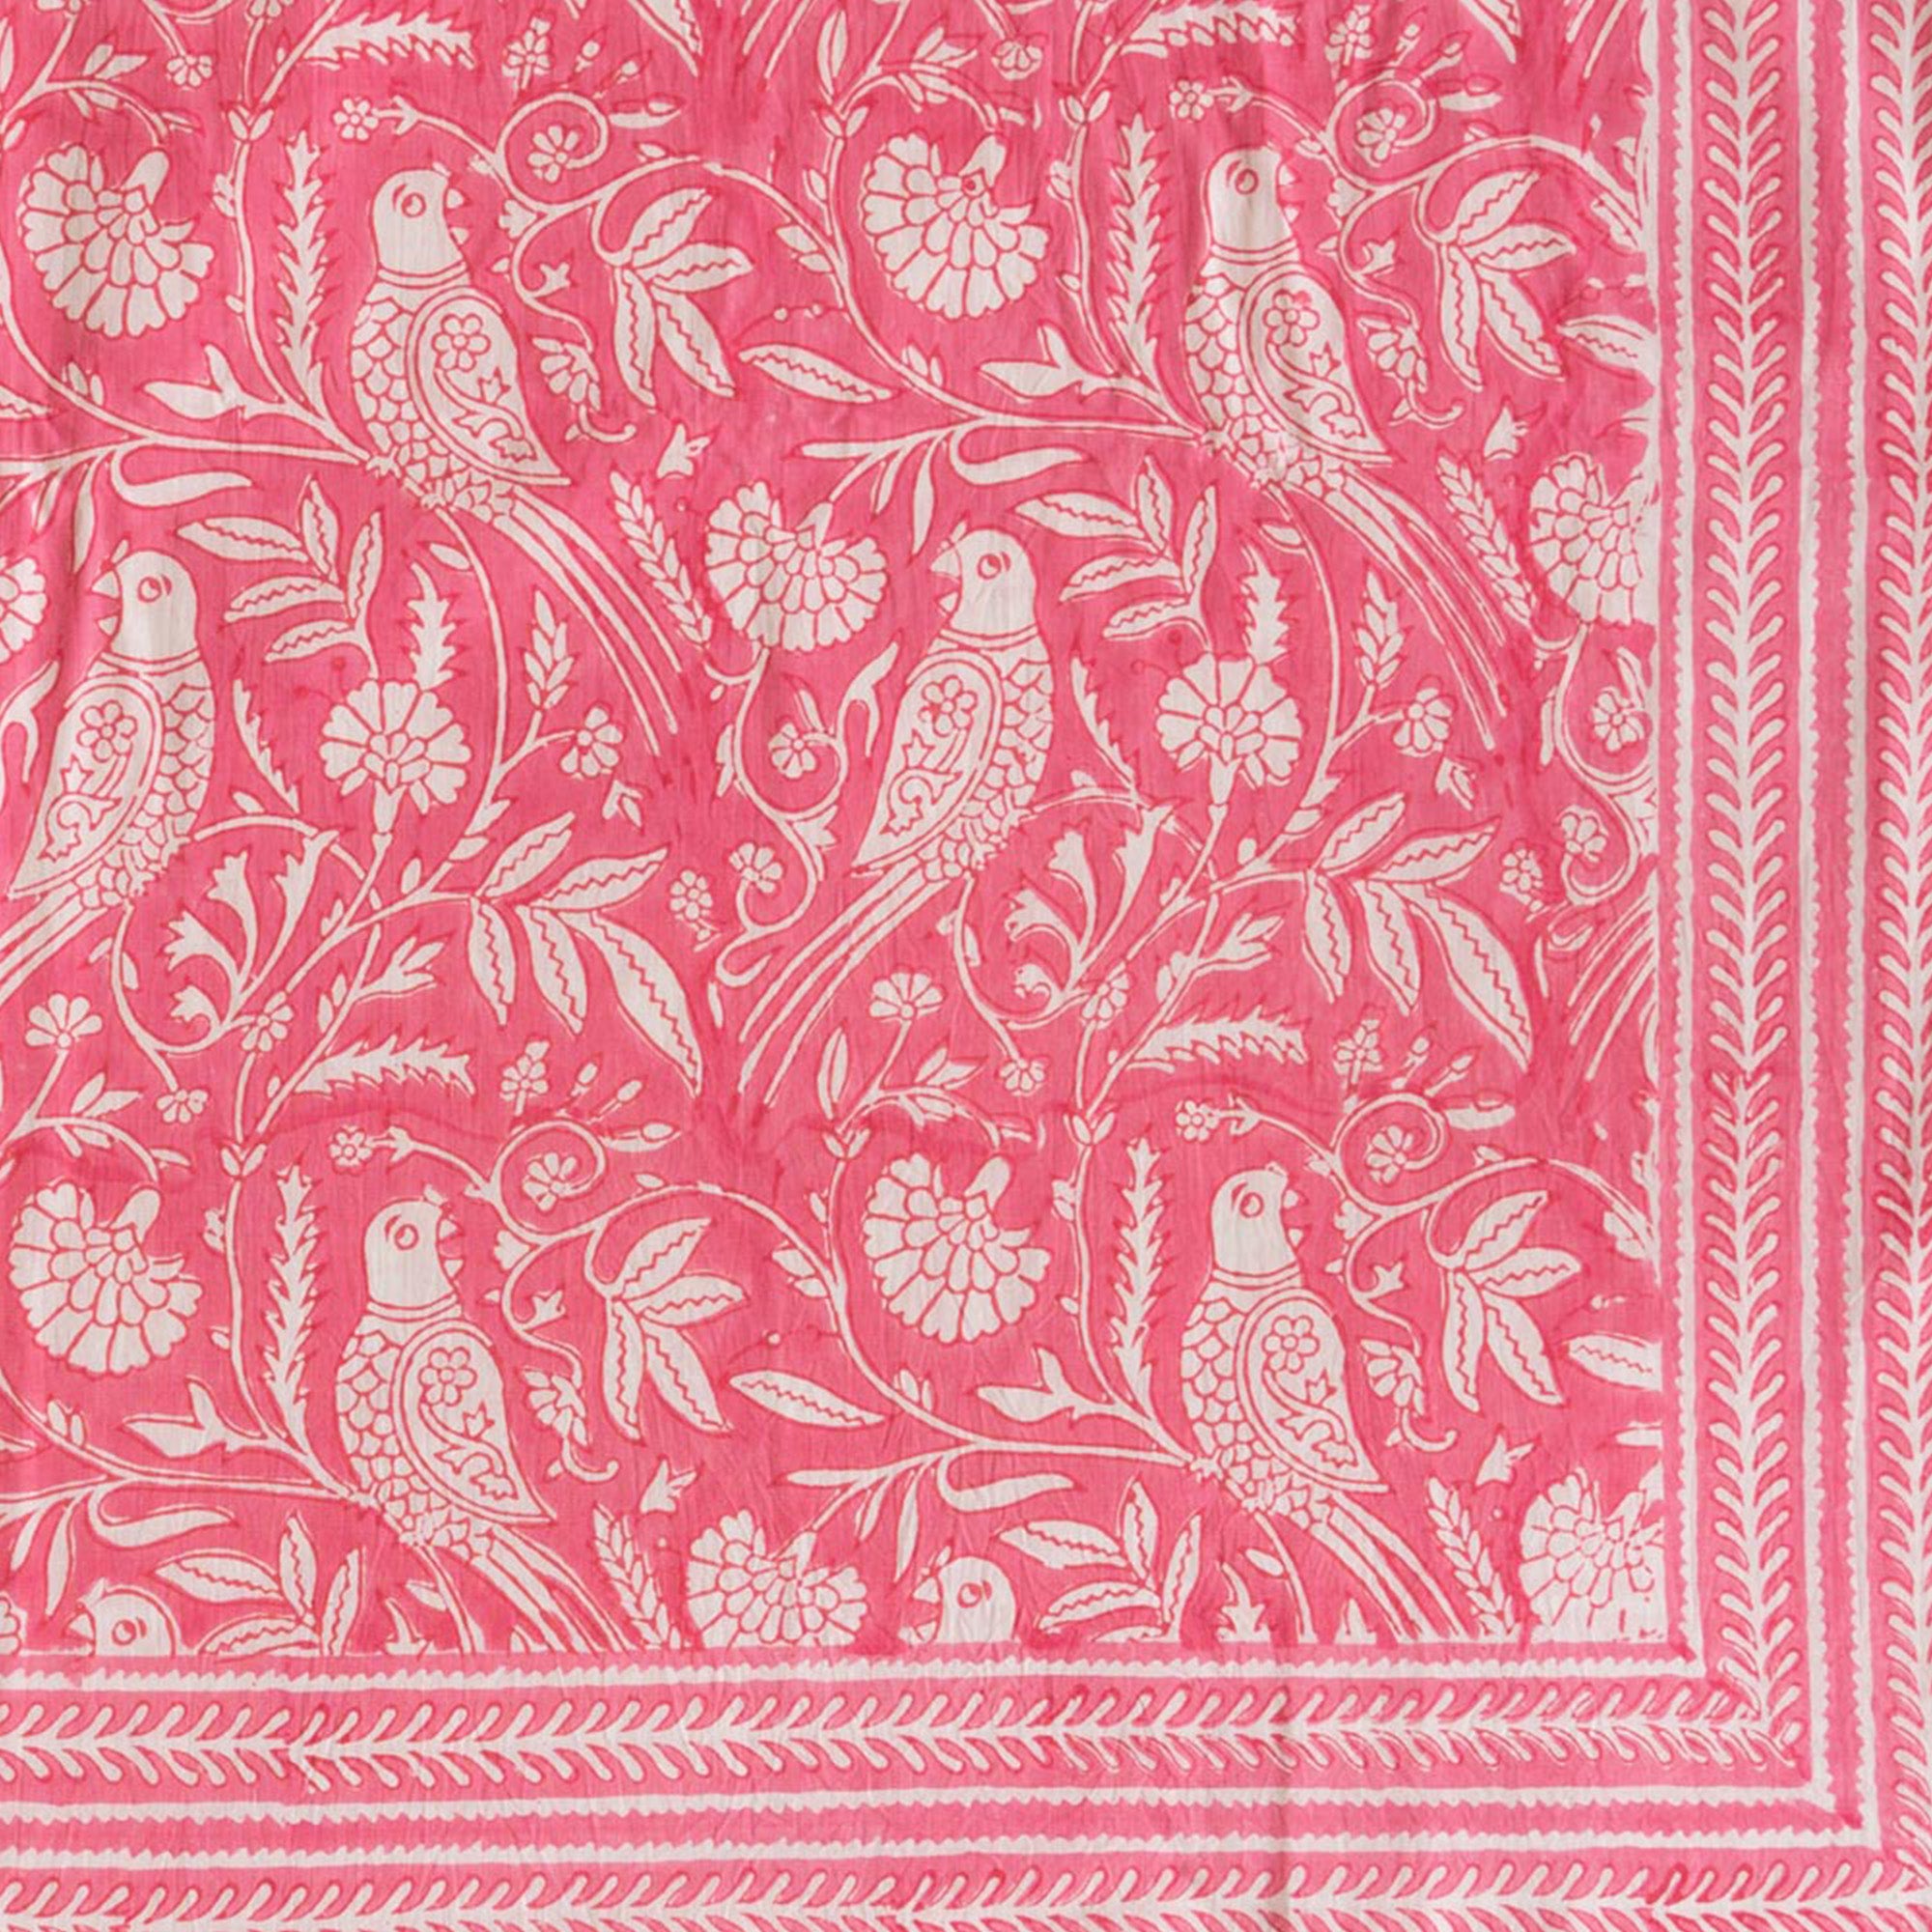 PARROT TABLECLOTH IN PINK